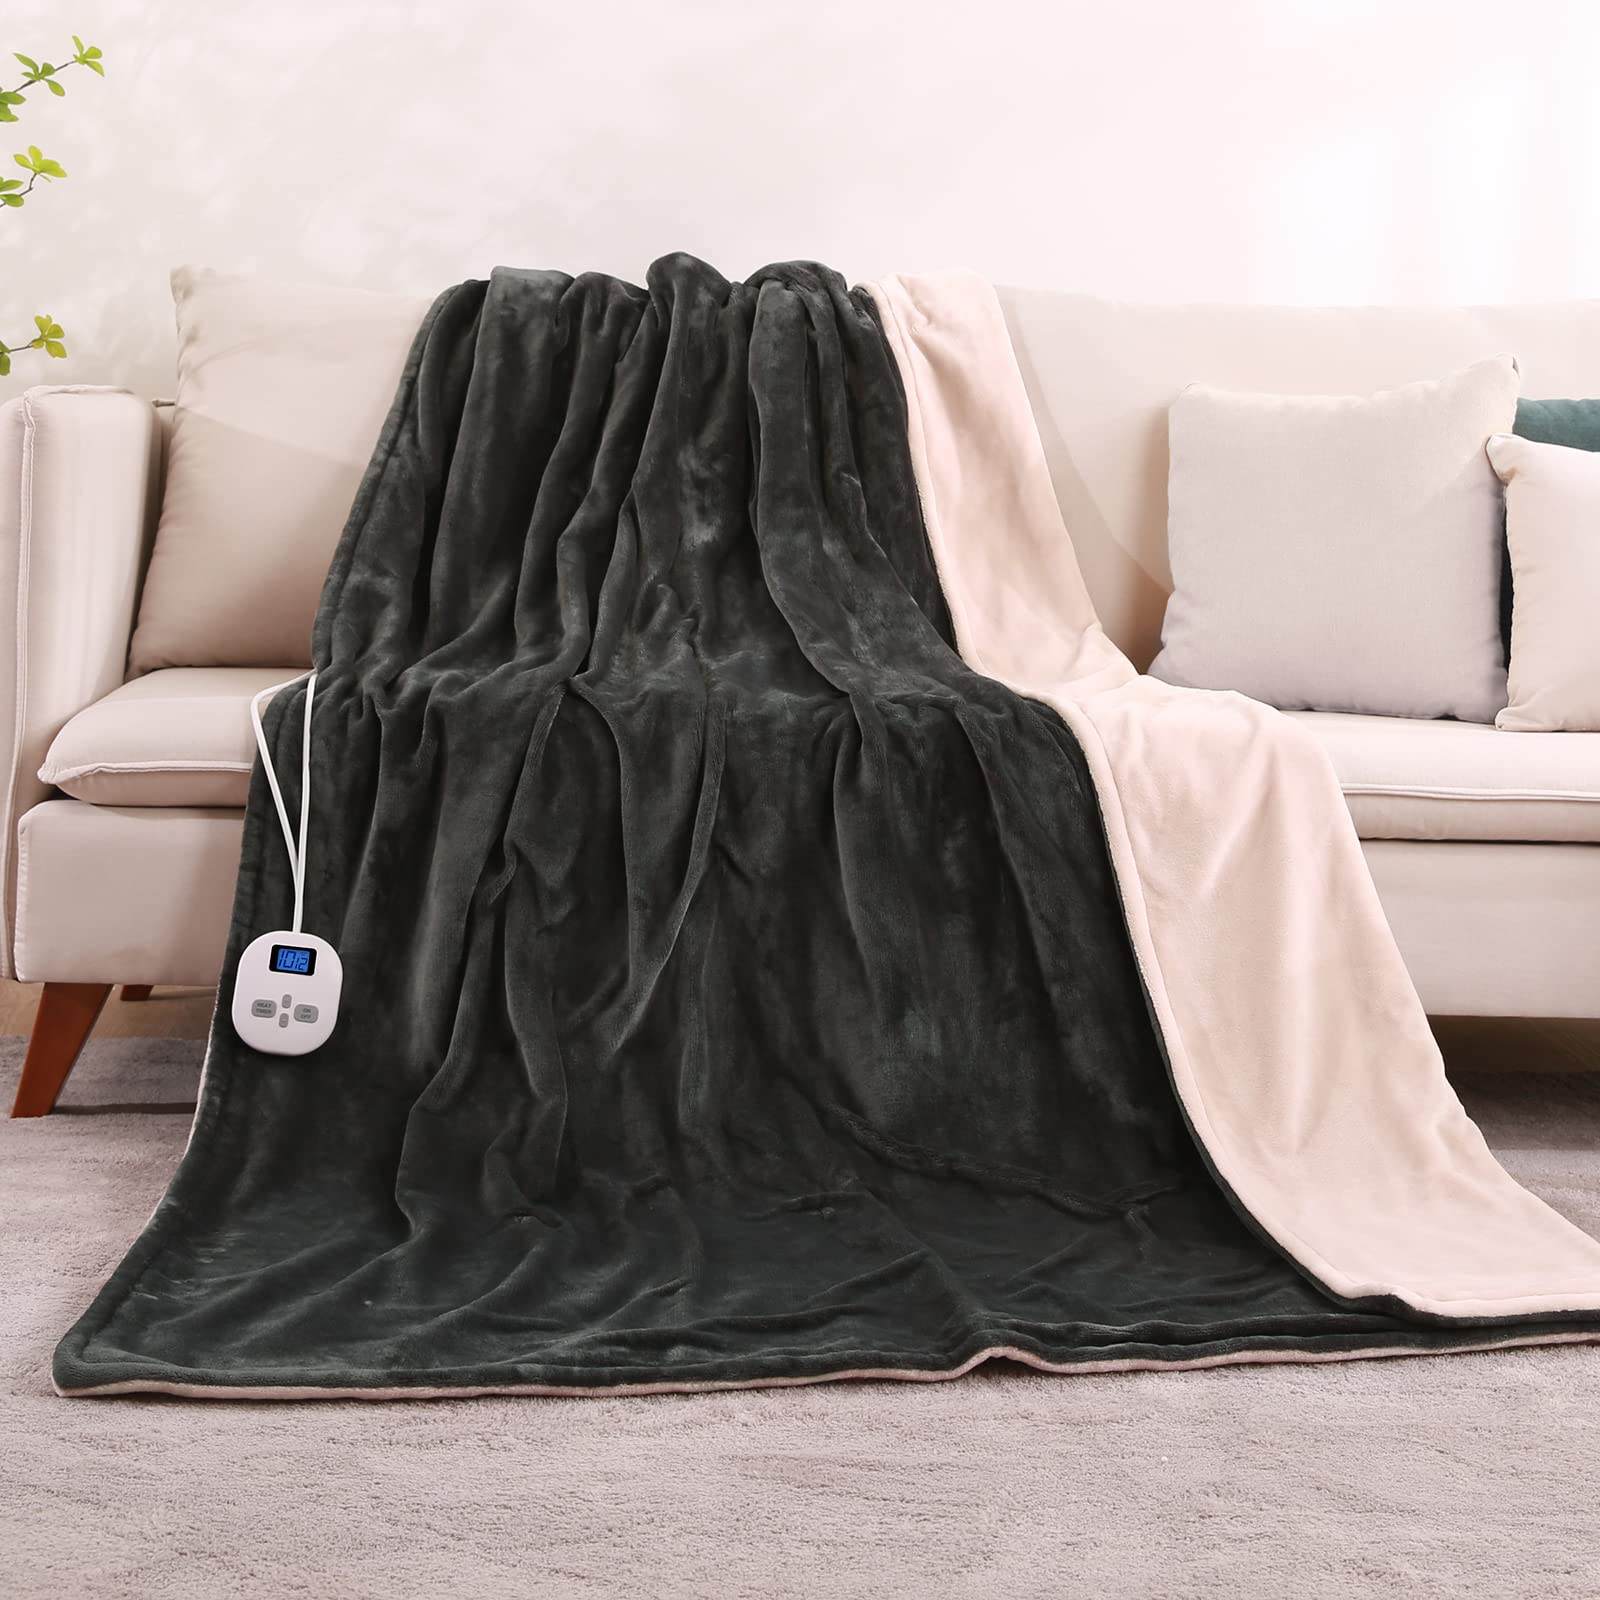 Electric Heated Blanket Heating Throws 150*200cm Large Size Super Warm Fabric with Fast Heating, Throw Blanket with Upgrade controller, 10 Heating Levels and 1-12H Time Setting for Full-Body Use